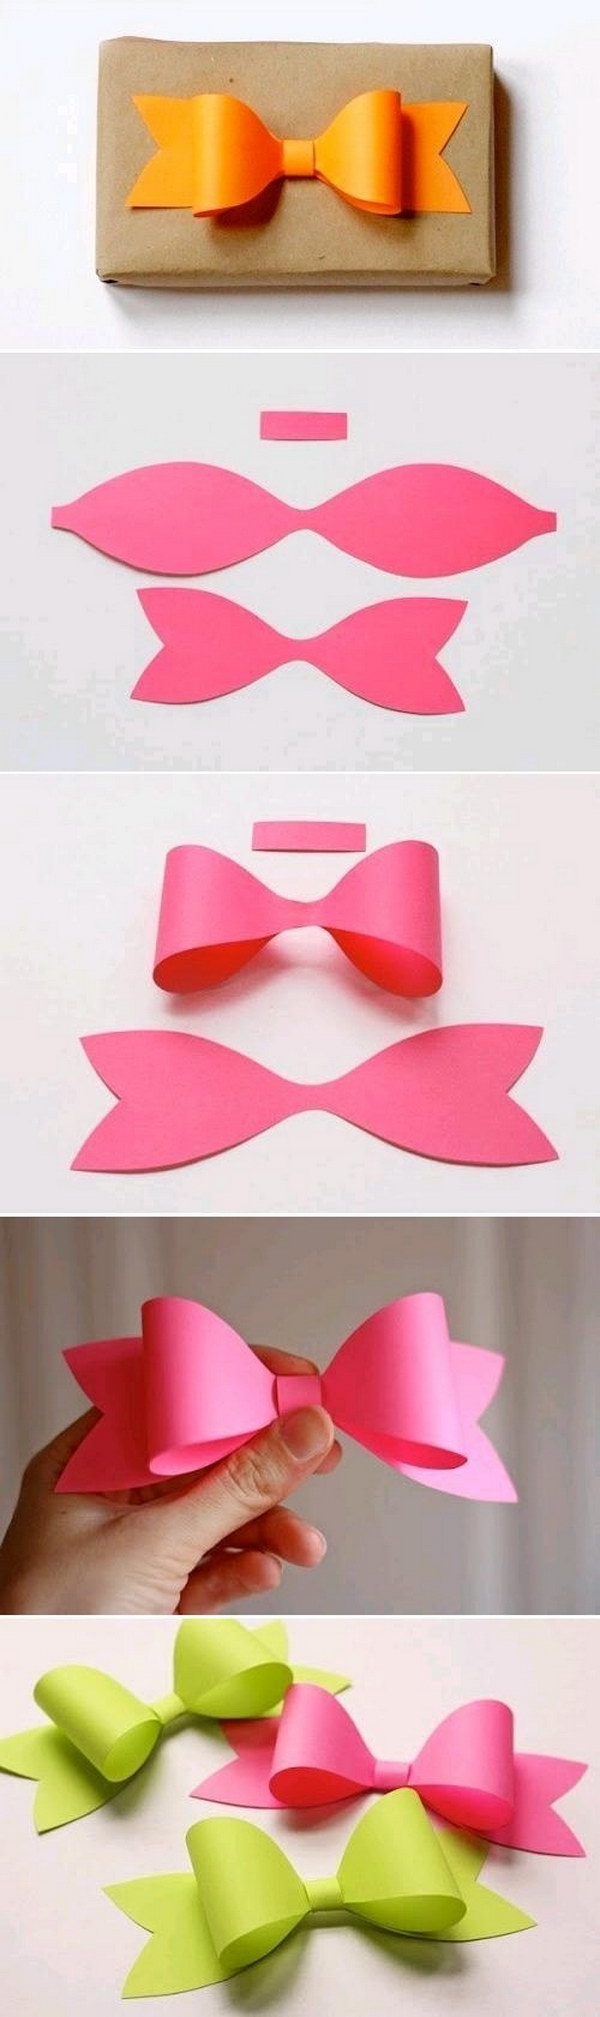 How to Make a Modular Gift Bow out of Paper. 